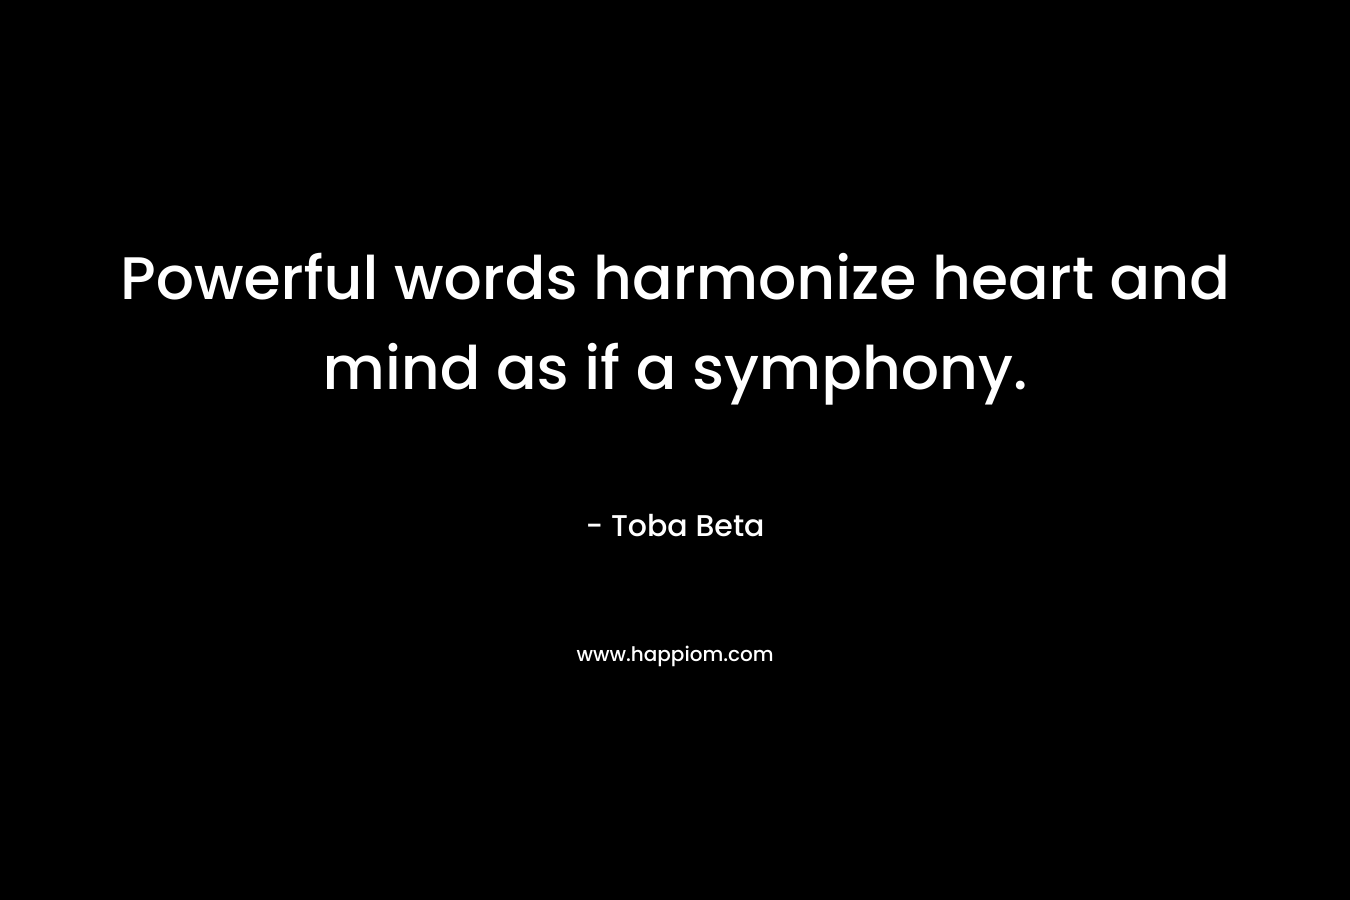 Powerful words harmonize heart and mind as if a symphony.